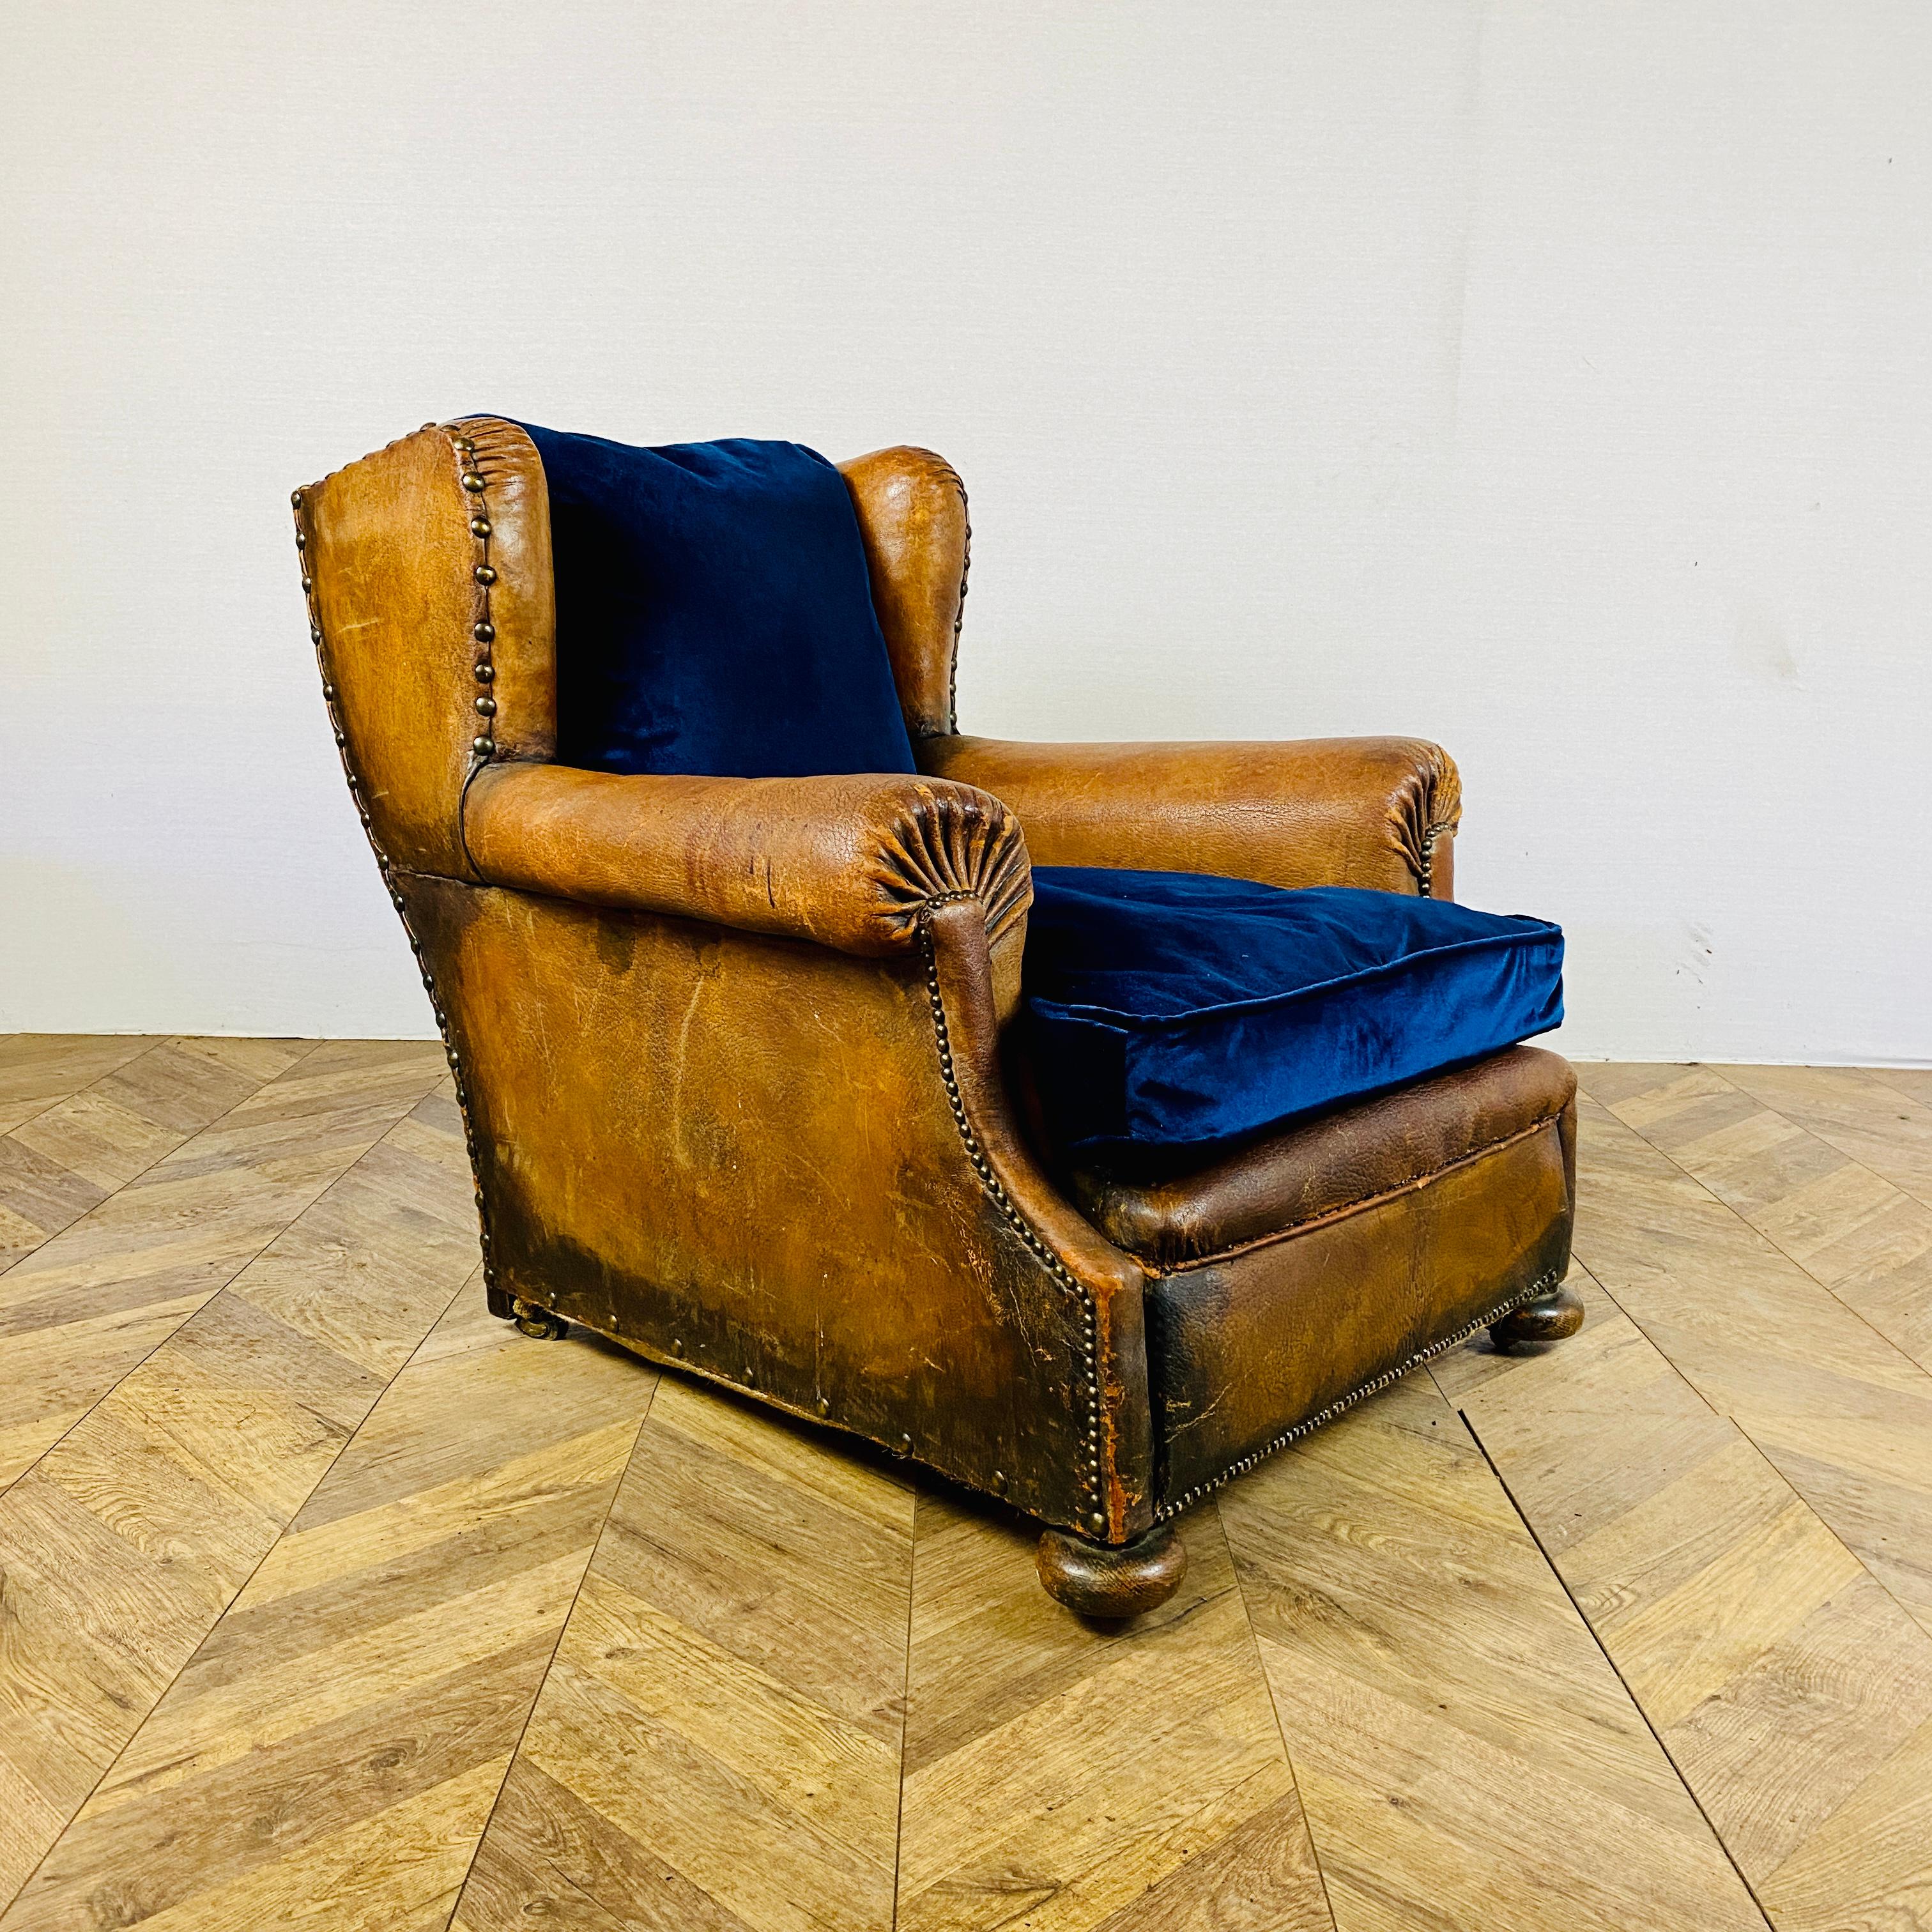 A Lovely Large Antique French leather club armchair on Original Wooden Castors - circa 1900s

The armchair has a wonderfully deep shape with a lovely warm patina. The upholstery was professionally updated to a navy velvet fabric, which is super